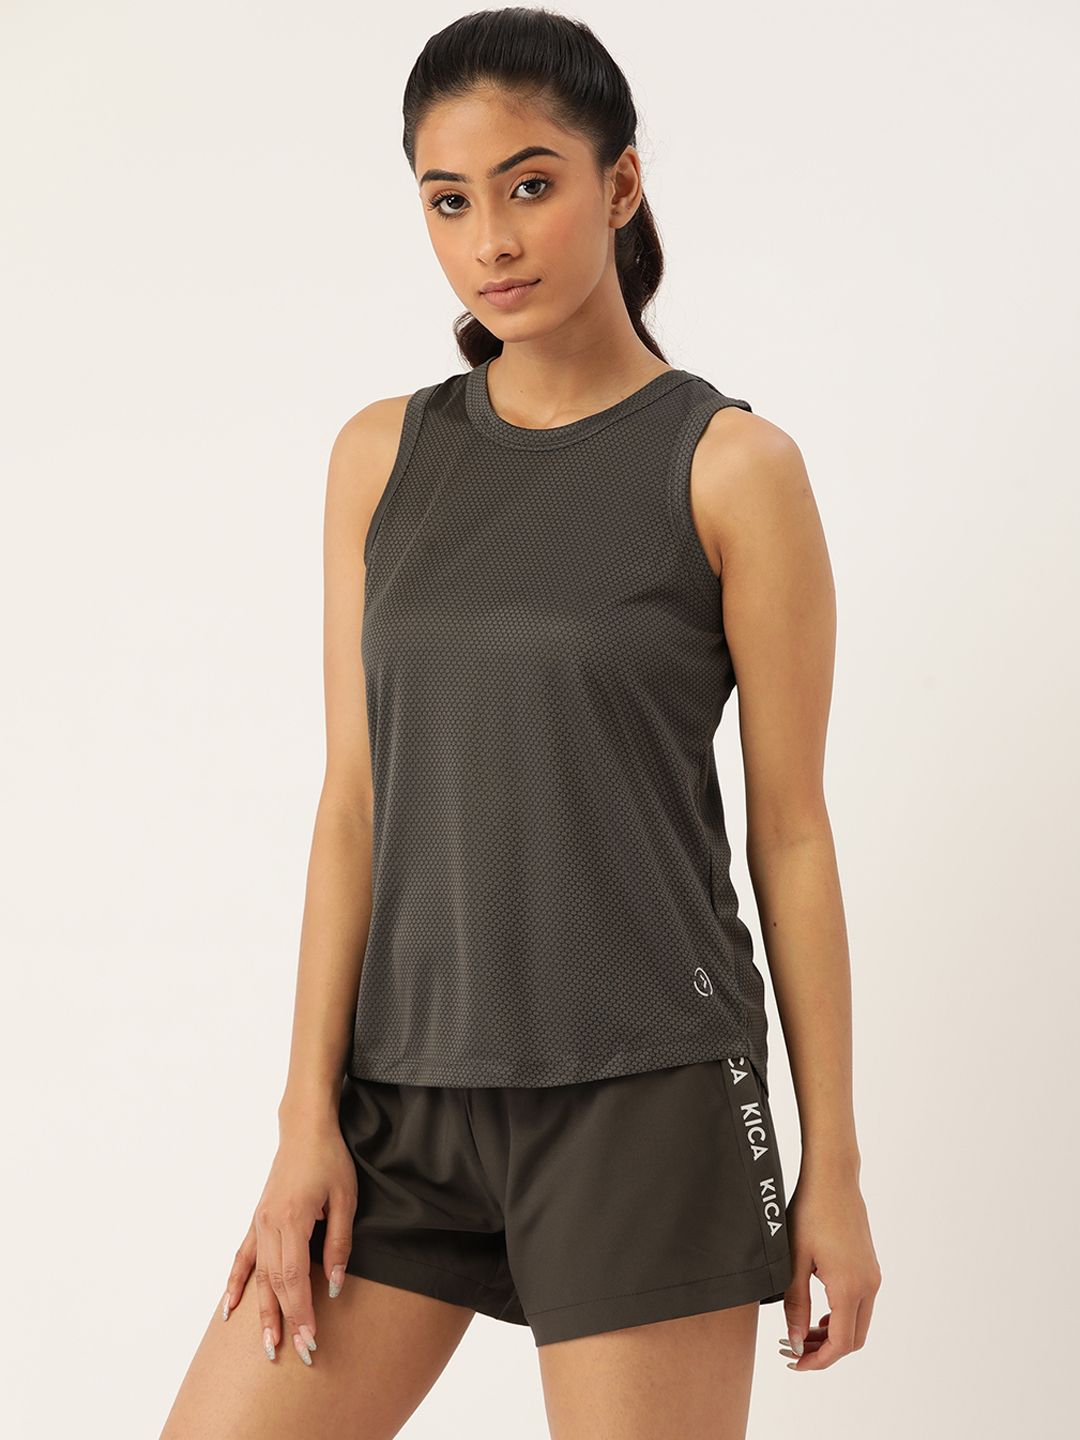 KICA Women Charcoal Grey Fast Drying Running Tracksuit Price in India